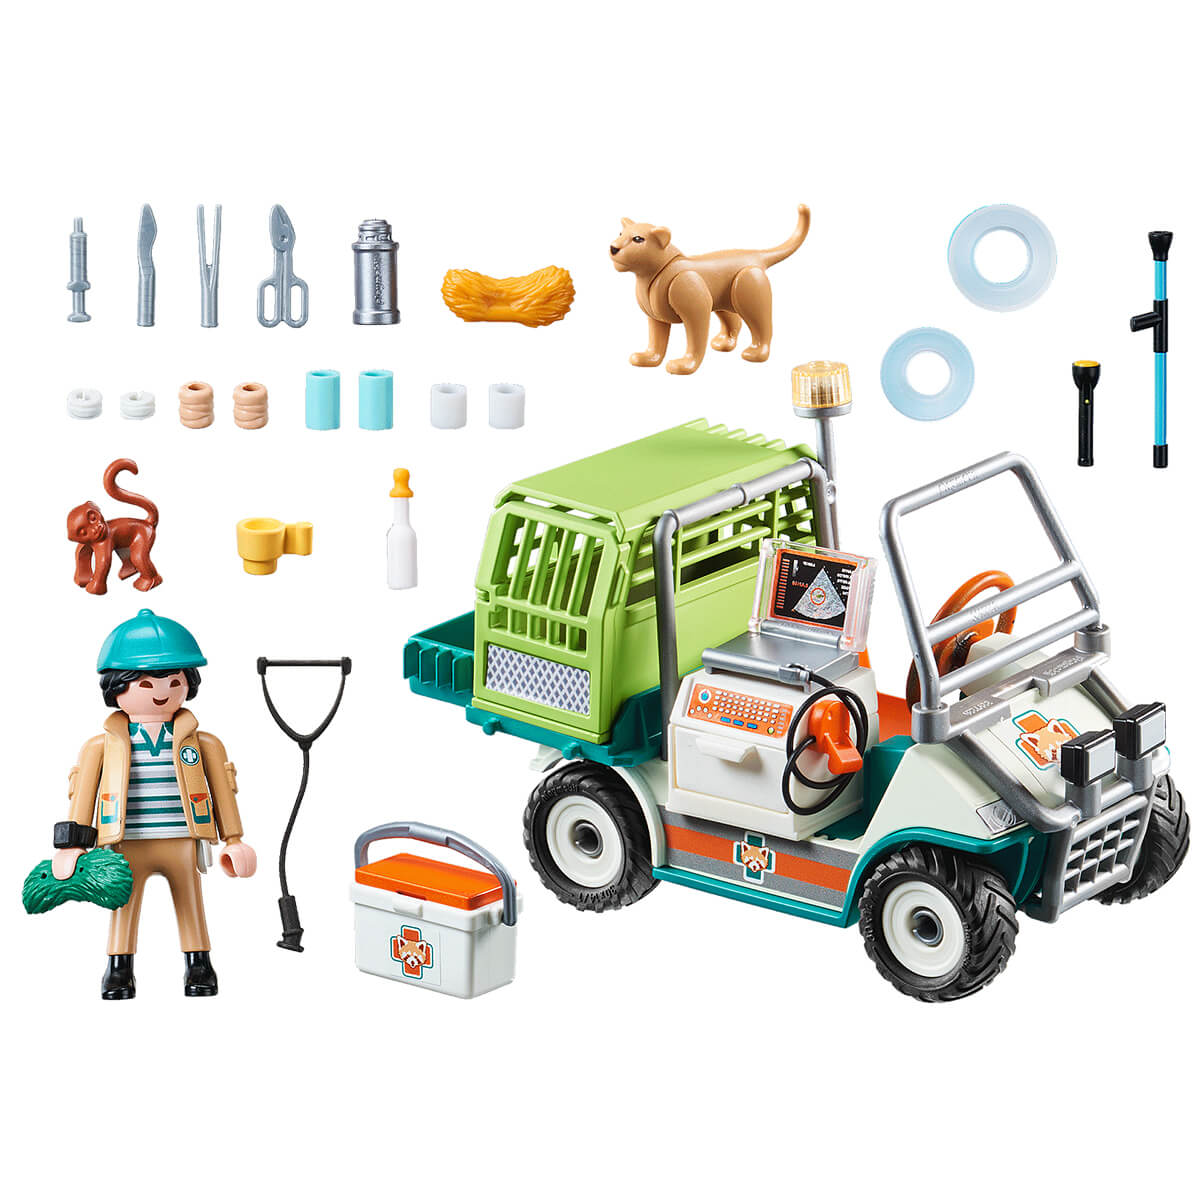 PLAYMOBIL Adventure Zoo Zoo Vet with Medical Cart (70346)